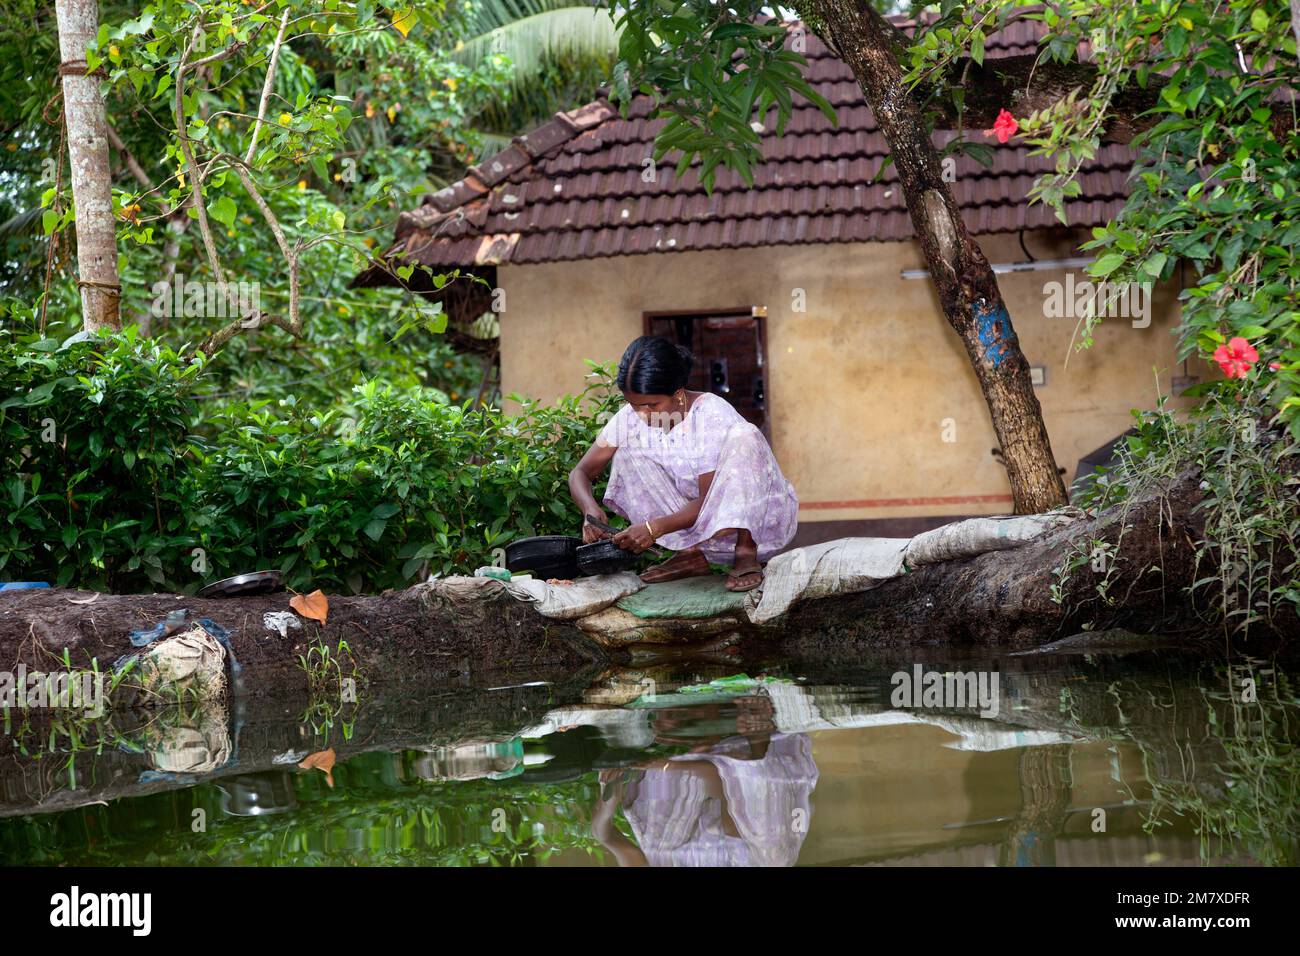 Allepy, India-September 7, 2012. Indian woman washes dishes and cutlery on the edge of one of the canals of Alappuzha Stock Photo